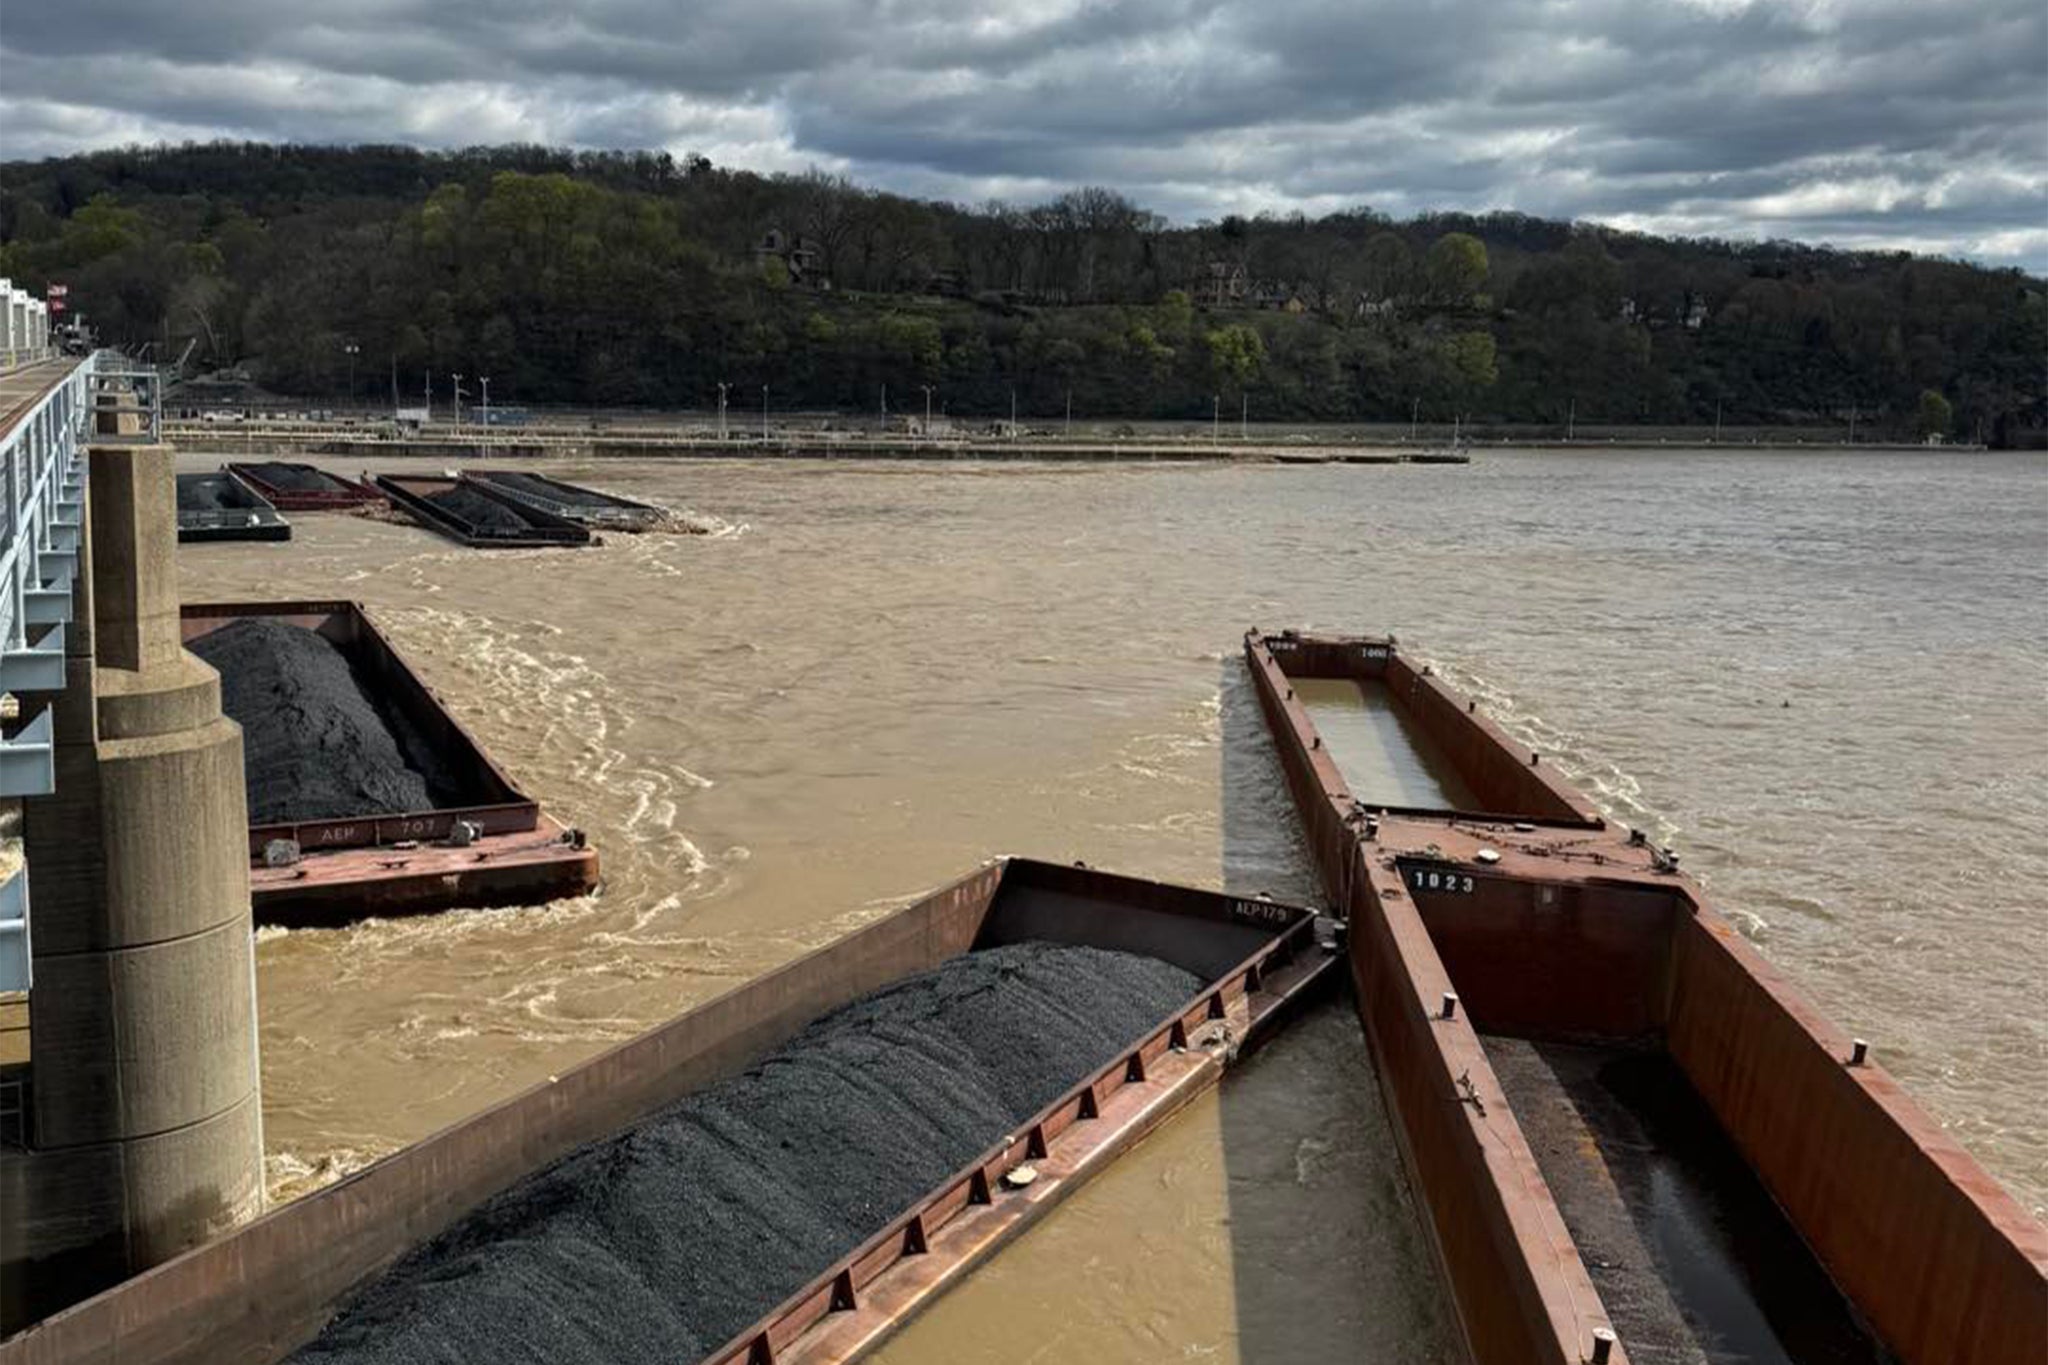 26 barges, several of which are pictured, broke loose in the Ohio River near Pittsburgh, Pennsylvania late Friday evening